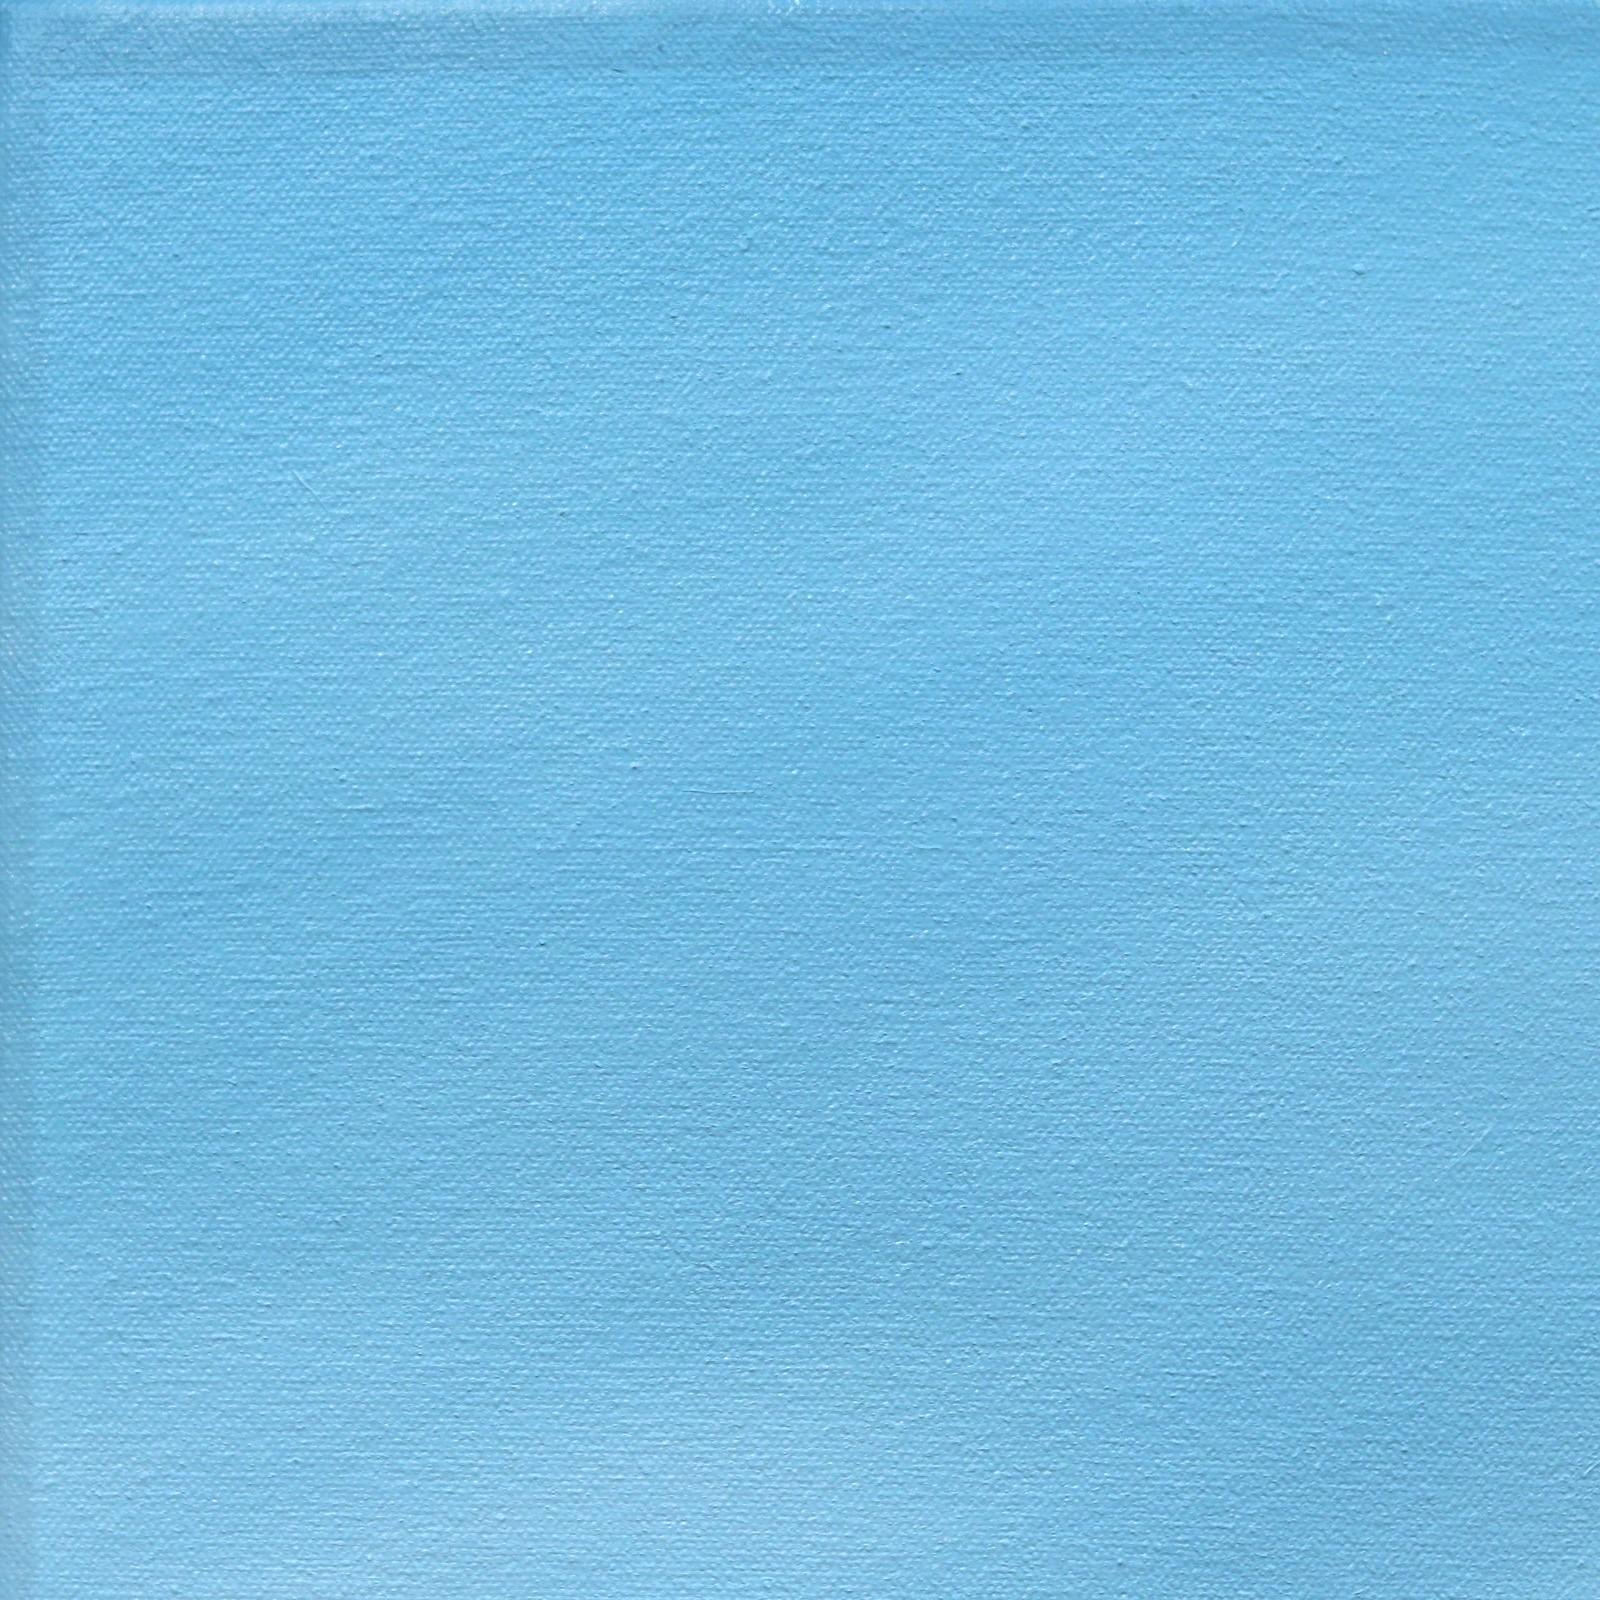 This stunning artwork by Jeremy Prim is a minimalist masterpiece that exudes tranquility and captures the essence of the Pacific coastline. The painting features a serene blue color palette that evokes a sense of calm and serenity. The bottom half